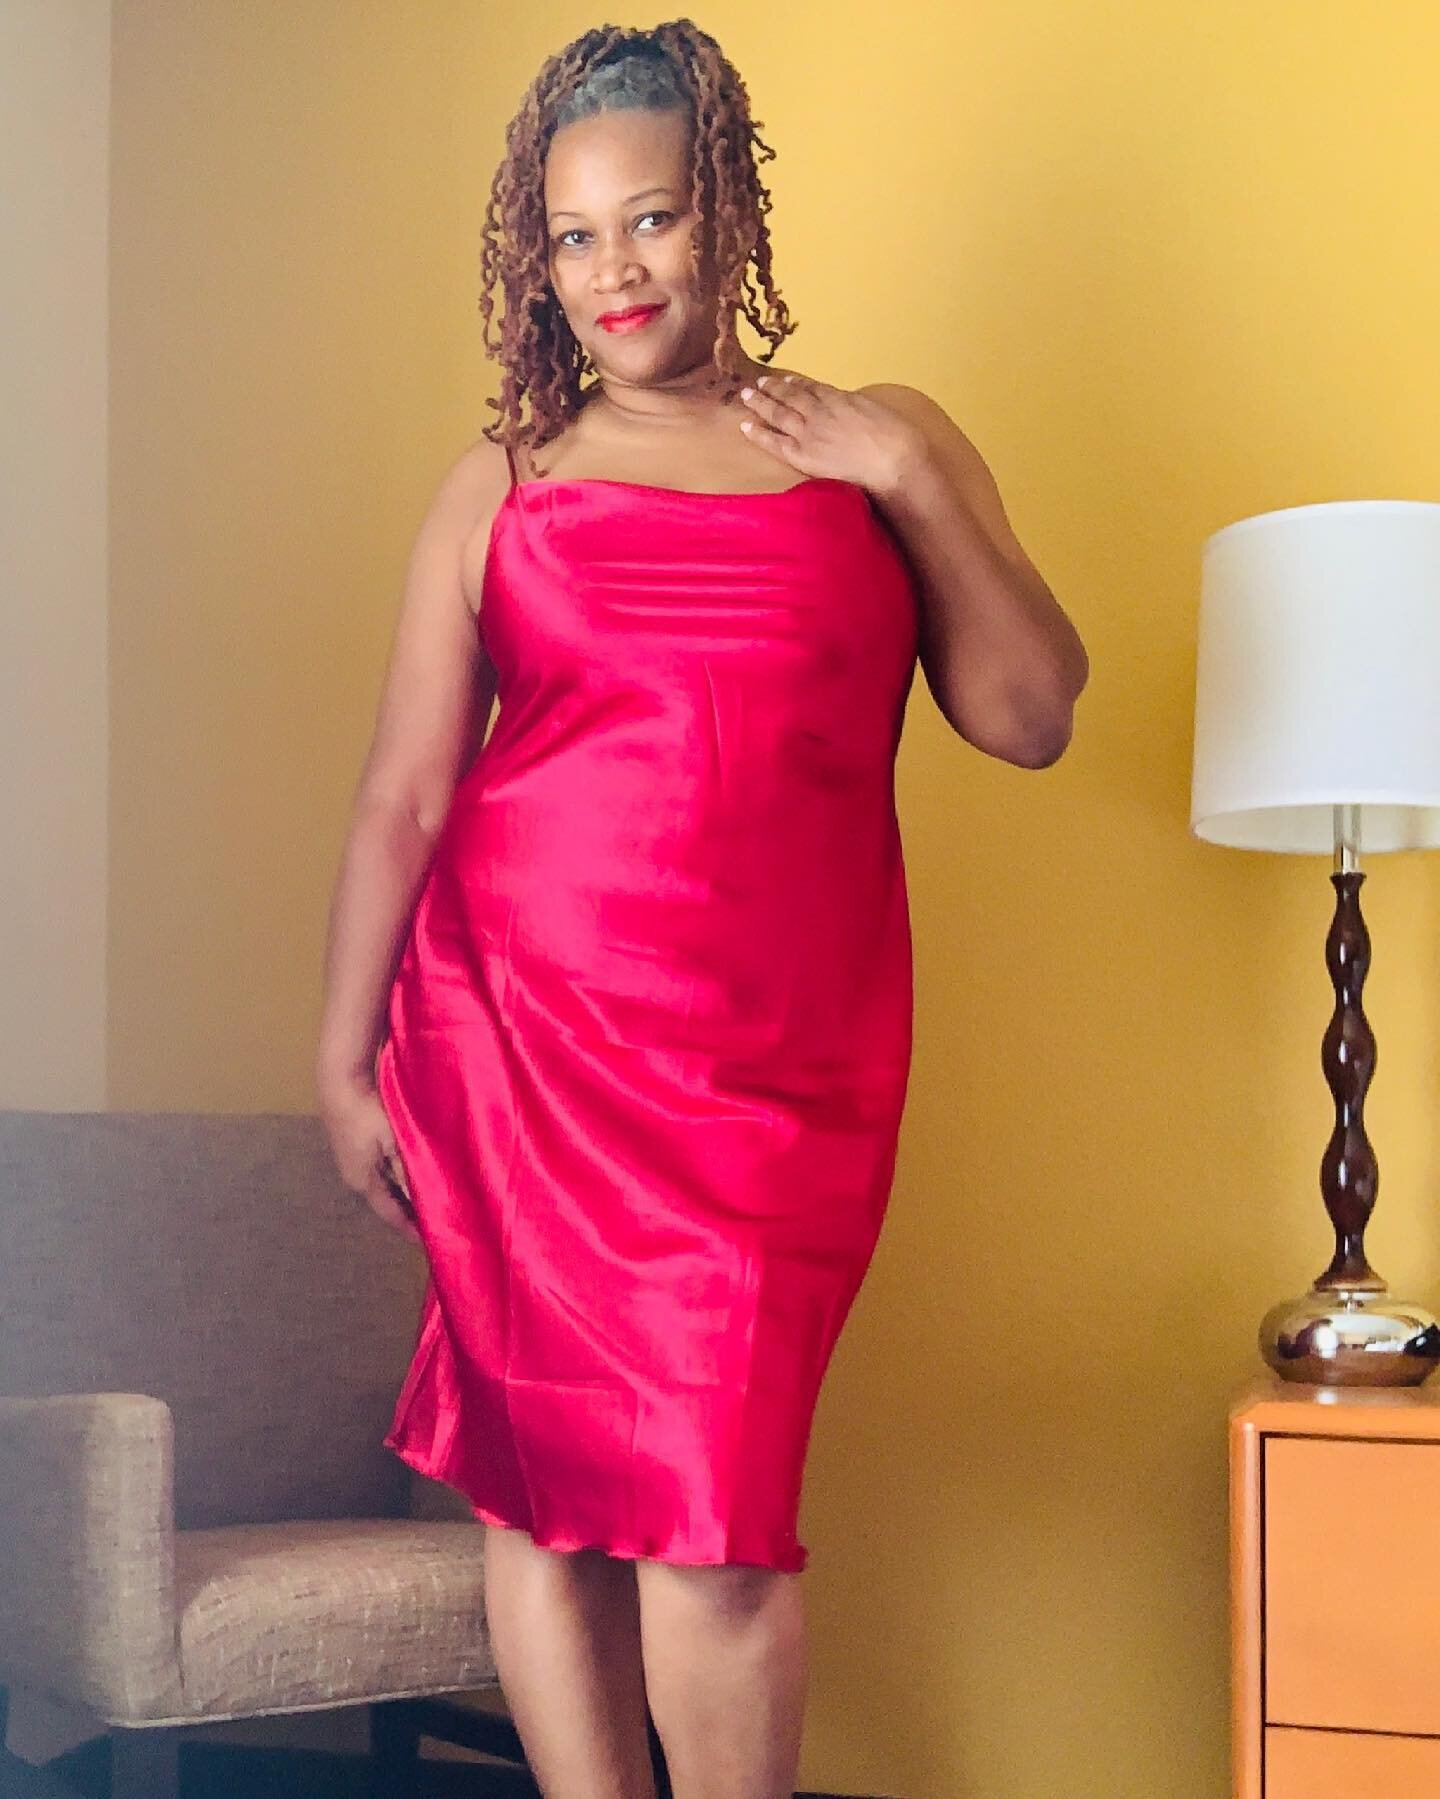 I&rsquo;m gonna heat up Date Night tonight in this little number.  Slip on some heels, grab a light cover up and you can catch me outside. 
.
.
.
#redslipdress #reddress #datenight #summertimefashion #pajamas #fireenginered #sexydress #curvygirlfashi